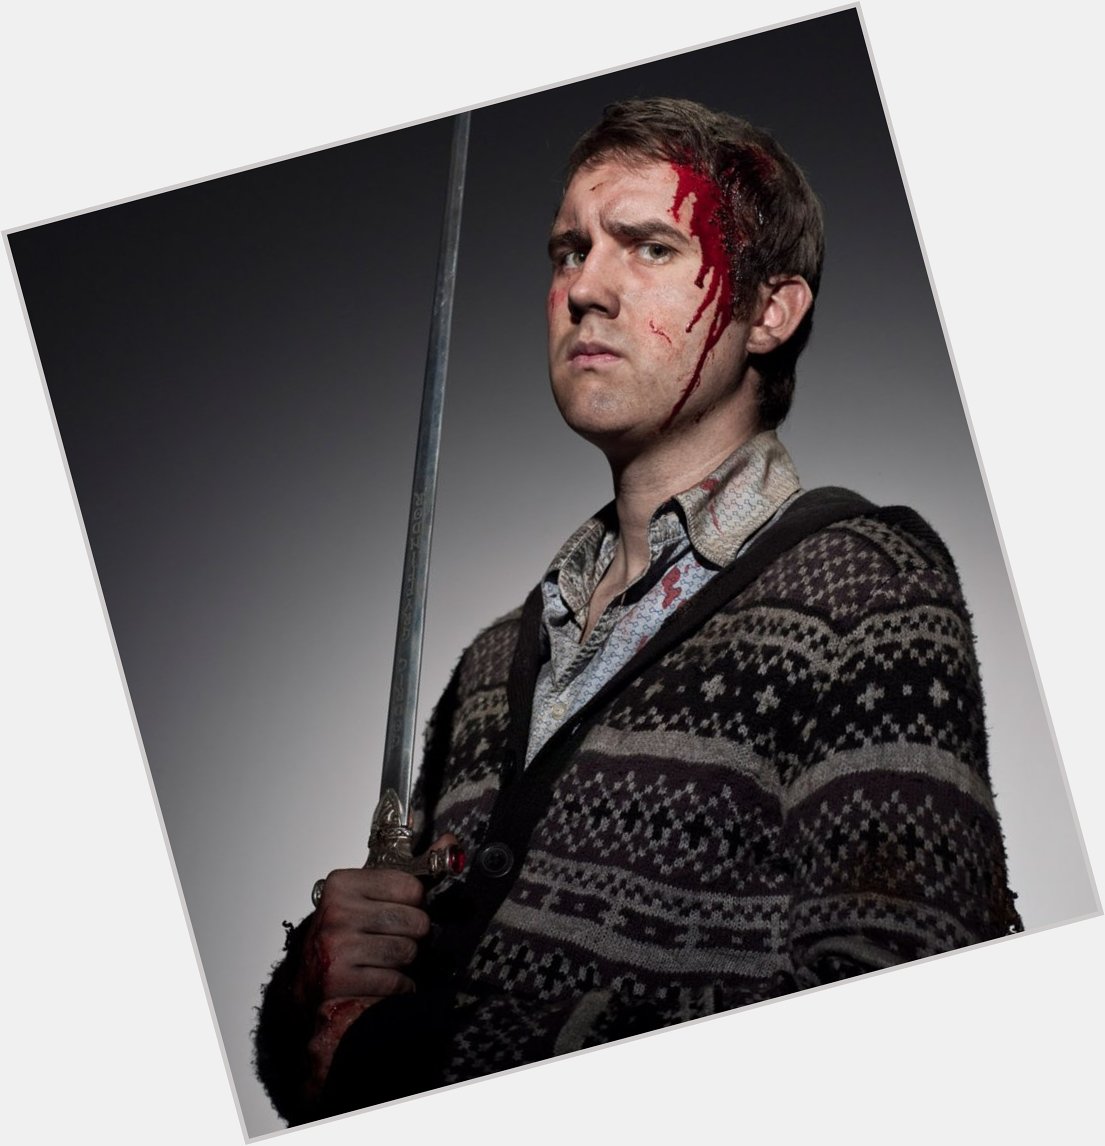 Happy birthday to Neville Longbottom, who turns 37 years old on July 30, 2017!!  